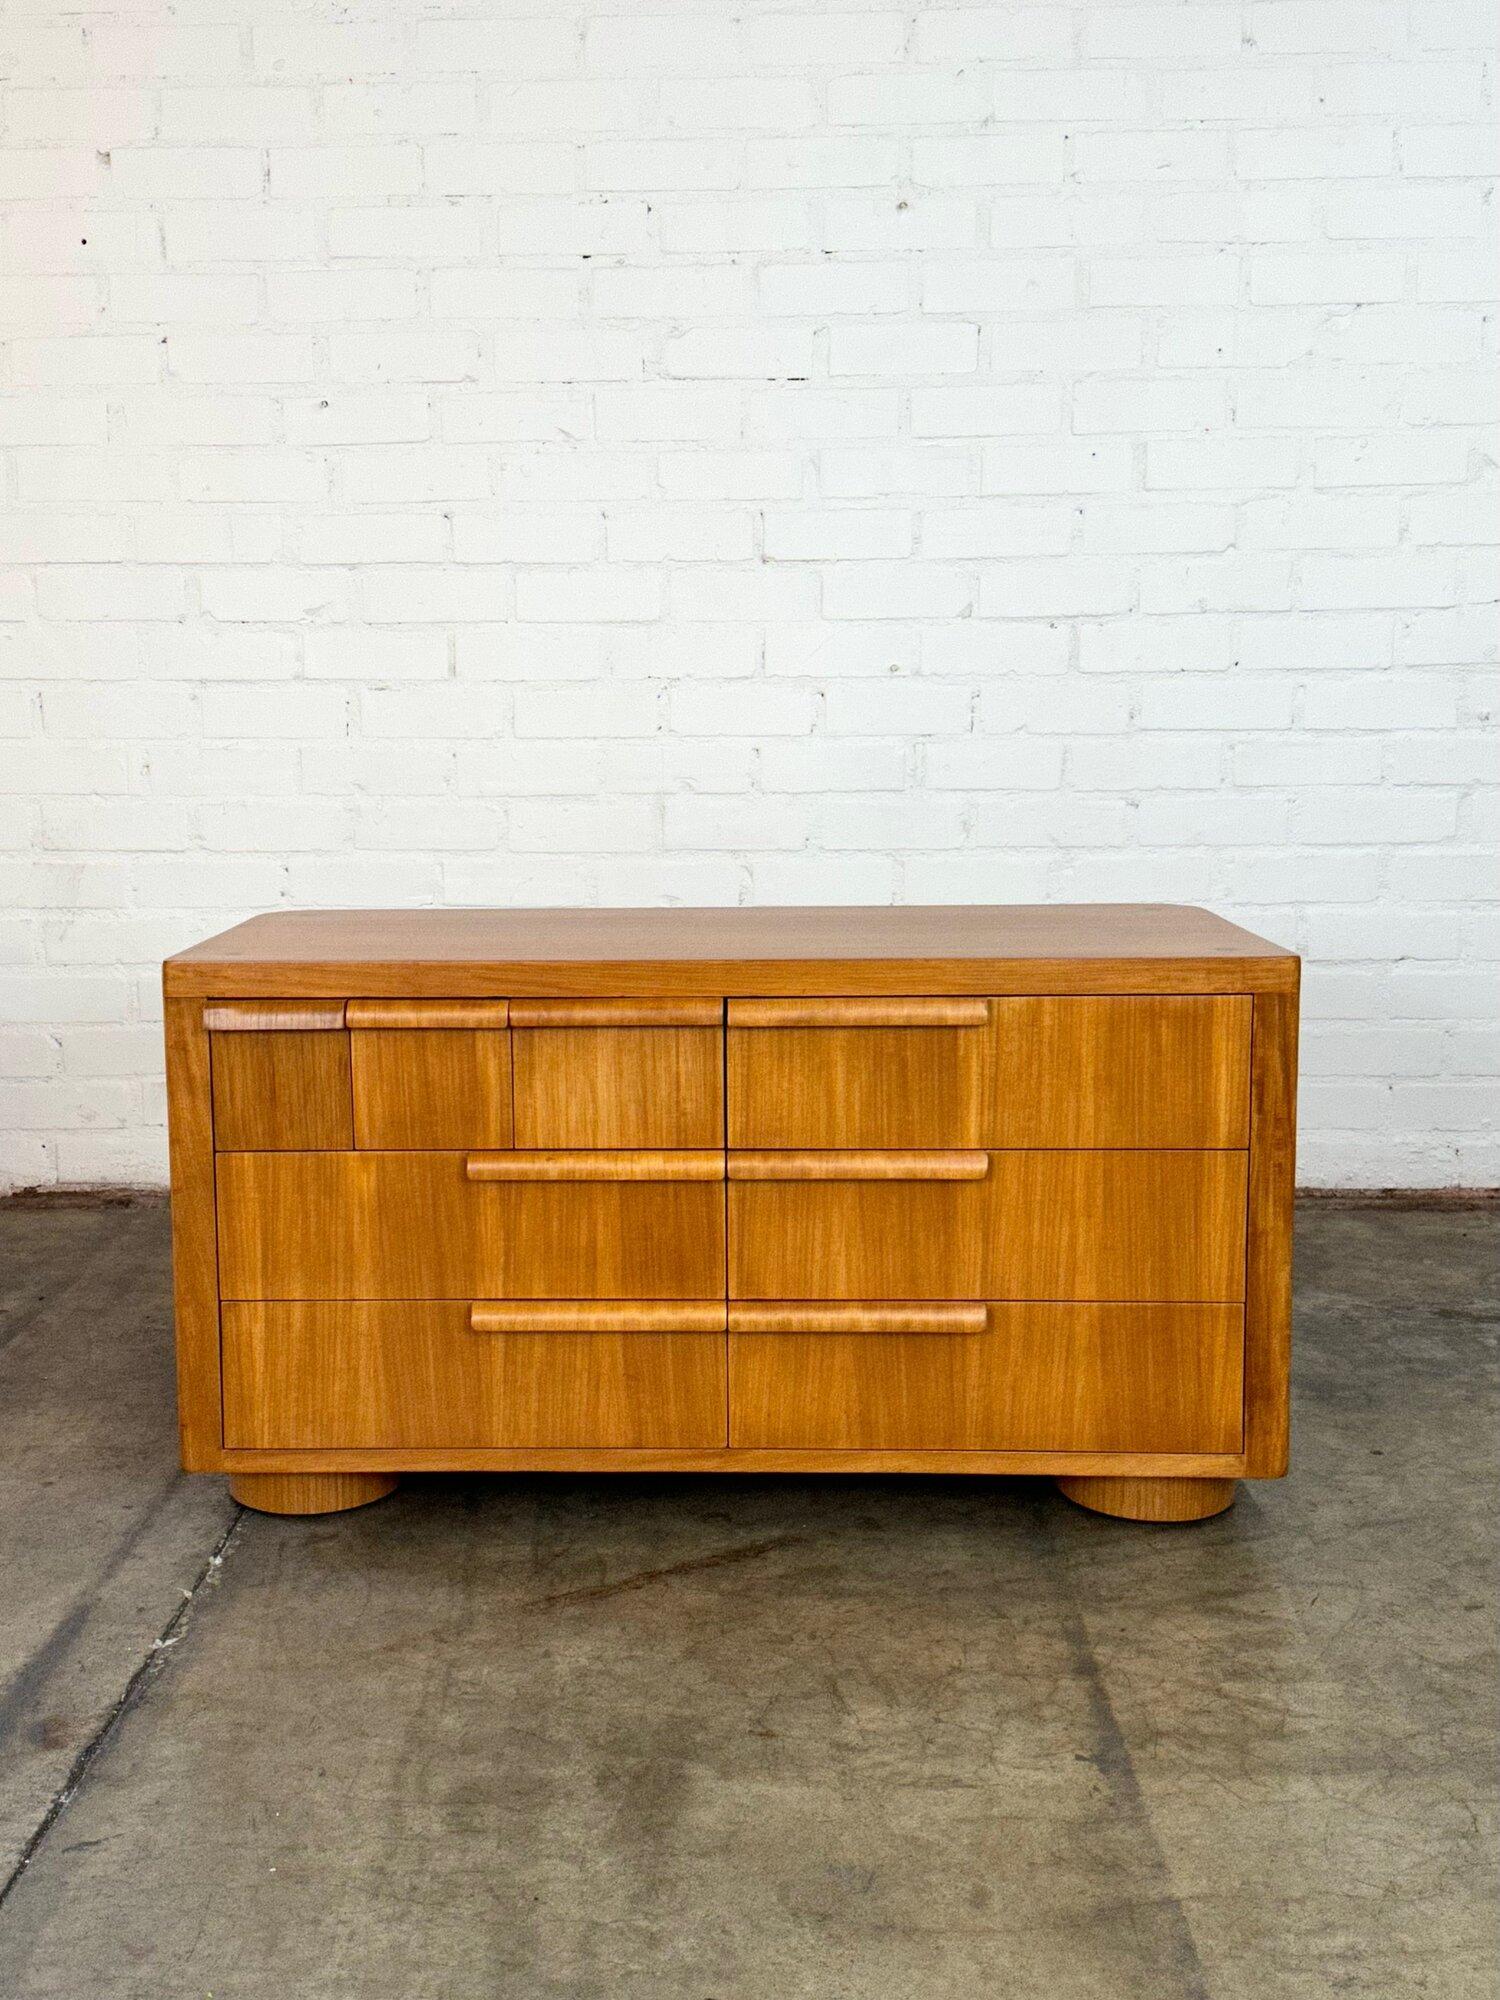 Dimensions: W48 D20 H26

Art Deco Low profile dresser in lightly restored condition. This one a kind dresser did have extensive damage when it arrived but some very unique details as well. Item is structurally sound and fully functional. Dressers